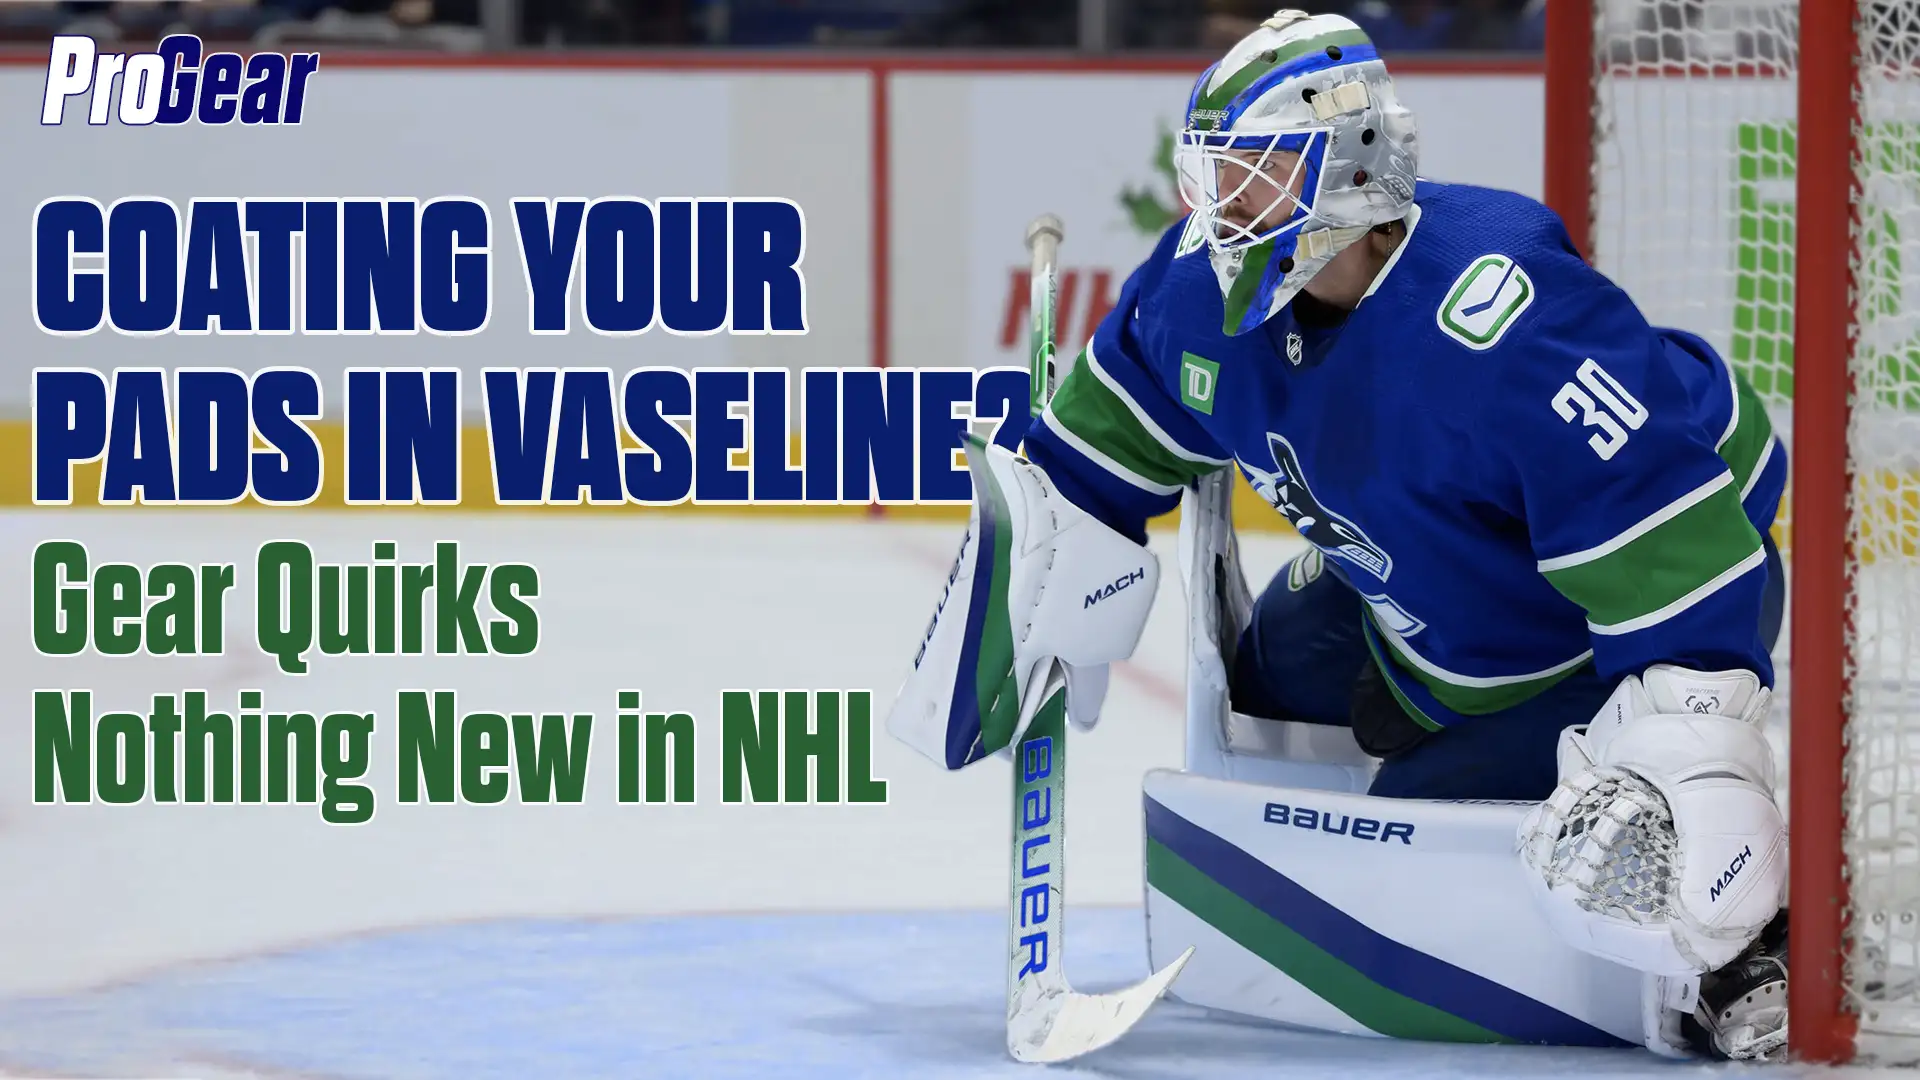 Pro Gear: Coating your pads in Vaseline?